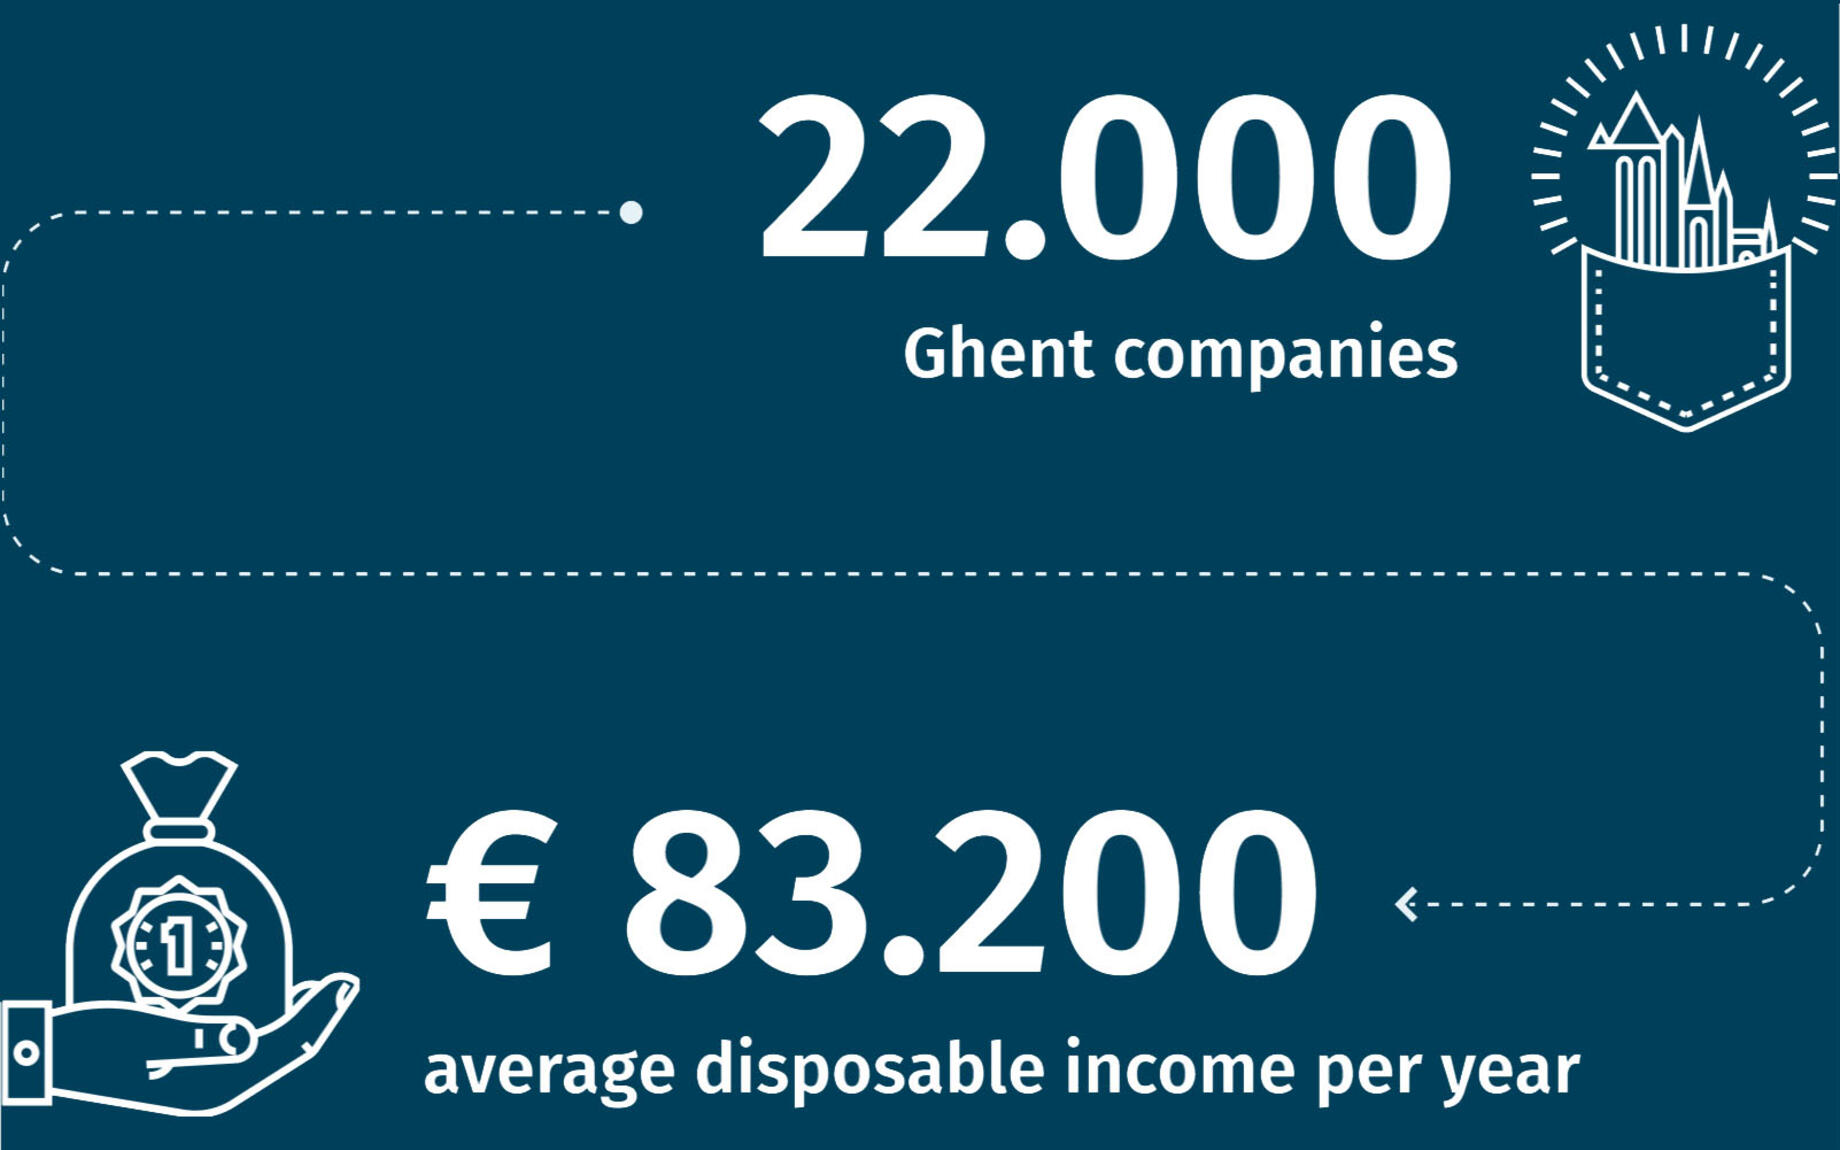 Invest in Ghent - The value of knowledge - 22.000 Ghent companies, € 83.200 average disposable income per year